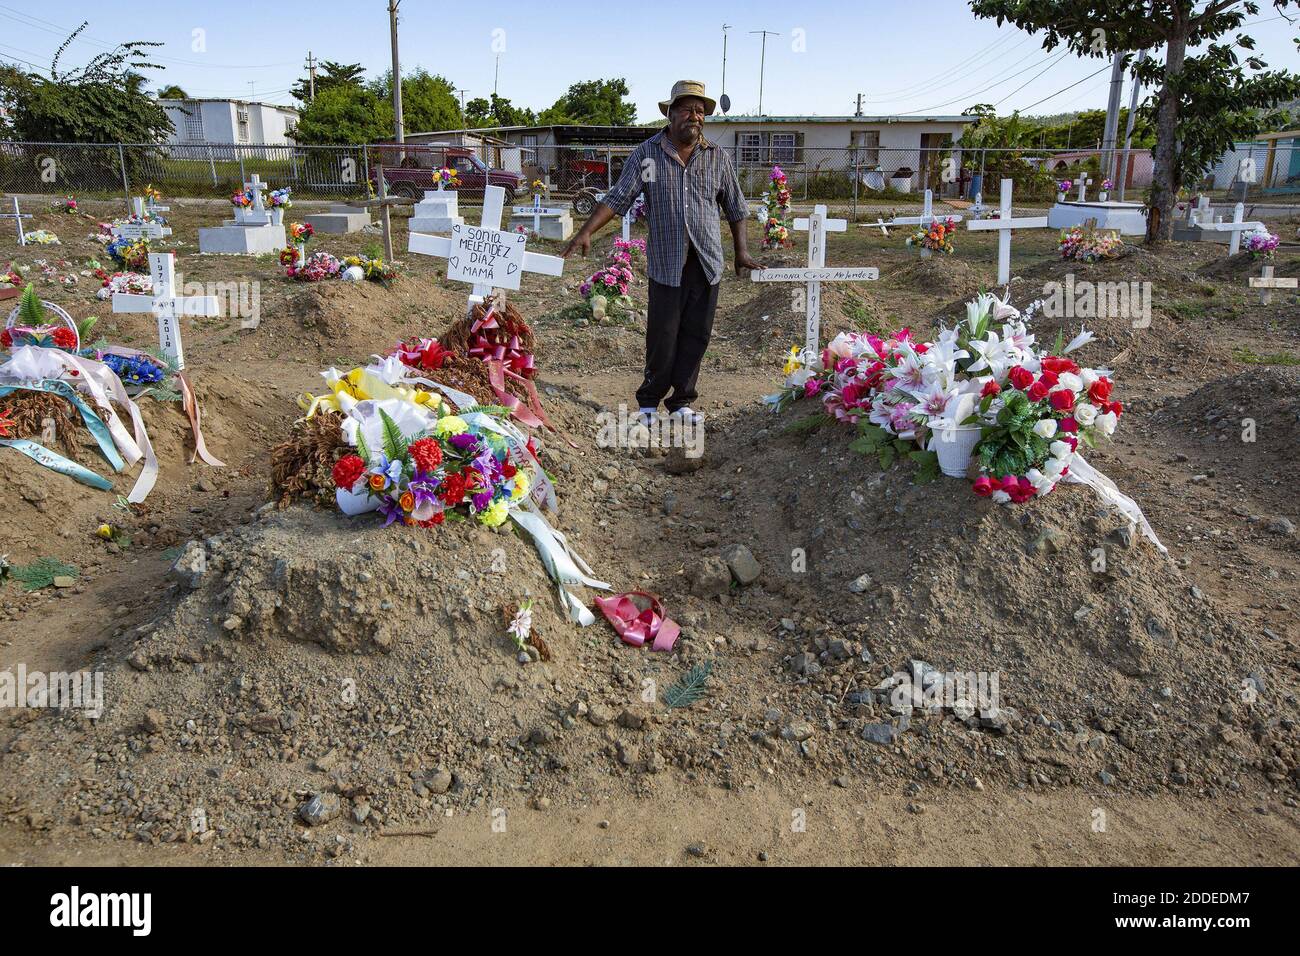 NO FILM, NO VIDEO, NO TV, NO DOCUMENTARY - Dialysis patient Radames Cabral Trinidad, 65, visits the cemetery on Wednesday, August 22, 2018 in Vieques, Puerto Rico. Many of the island's residents who have died are buried here since Hurricane Maria struck the island a year ago. Several of the dead were dialysis patients. Photo by Al Diaz/Miami Herald/TNS/ABACAPRESS.COM Stock Photo